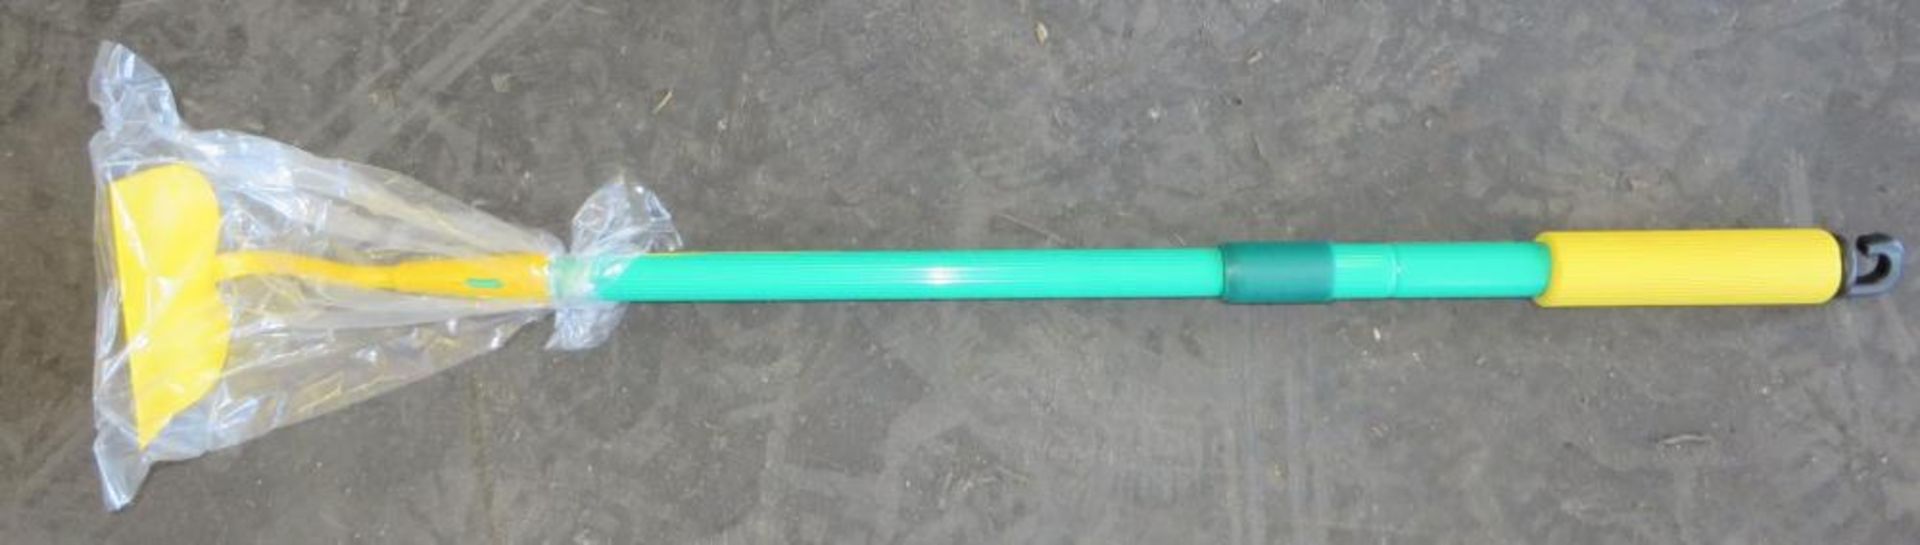 12 x Educational Infant Telescopic Hoes - New - CL185 - Ref: DRT0655 - Location: Stoke ST3 - Image 4 of 4